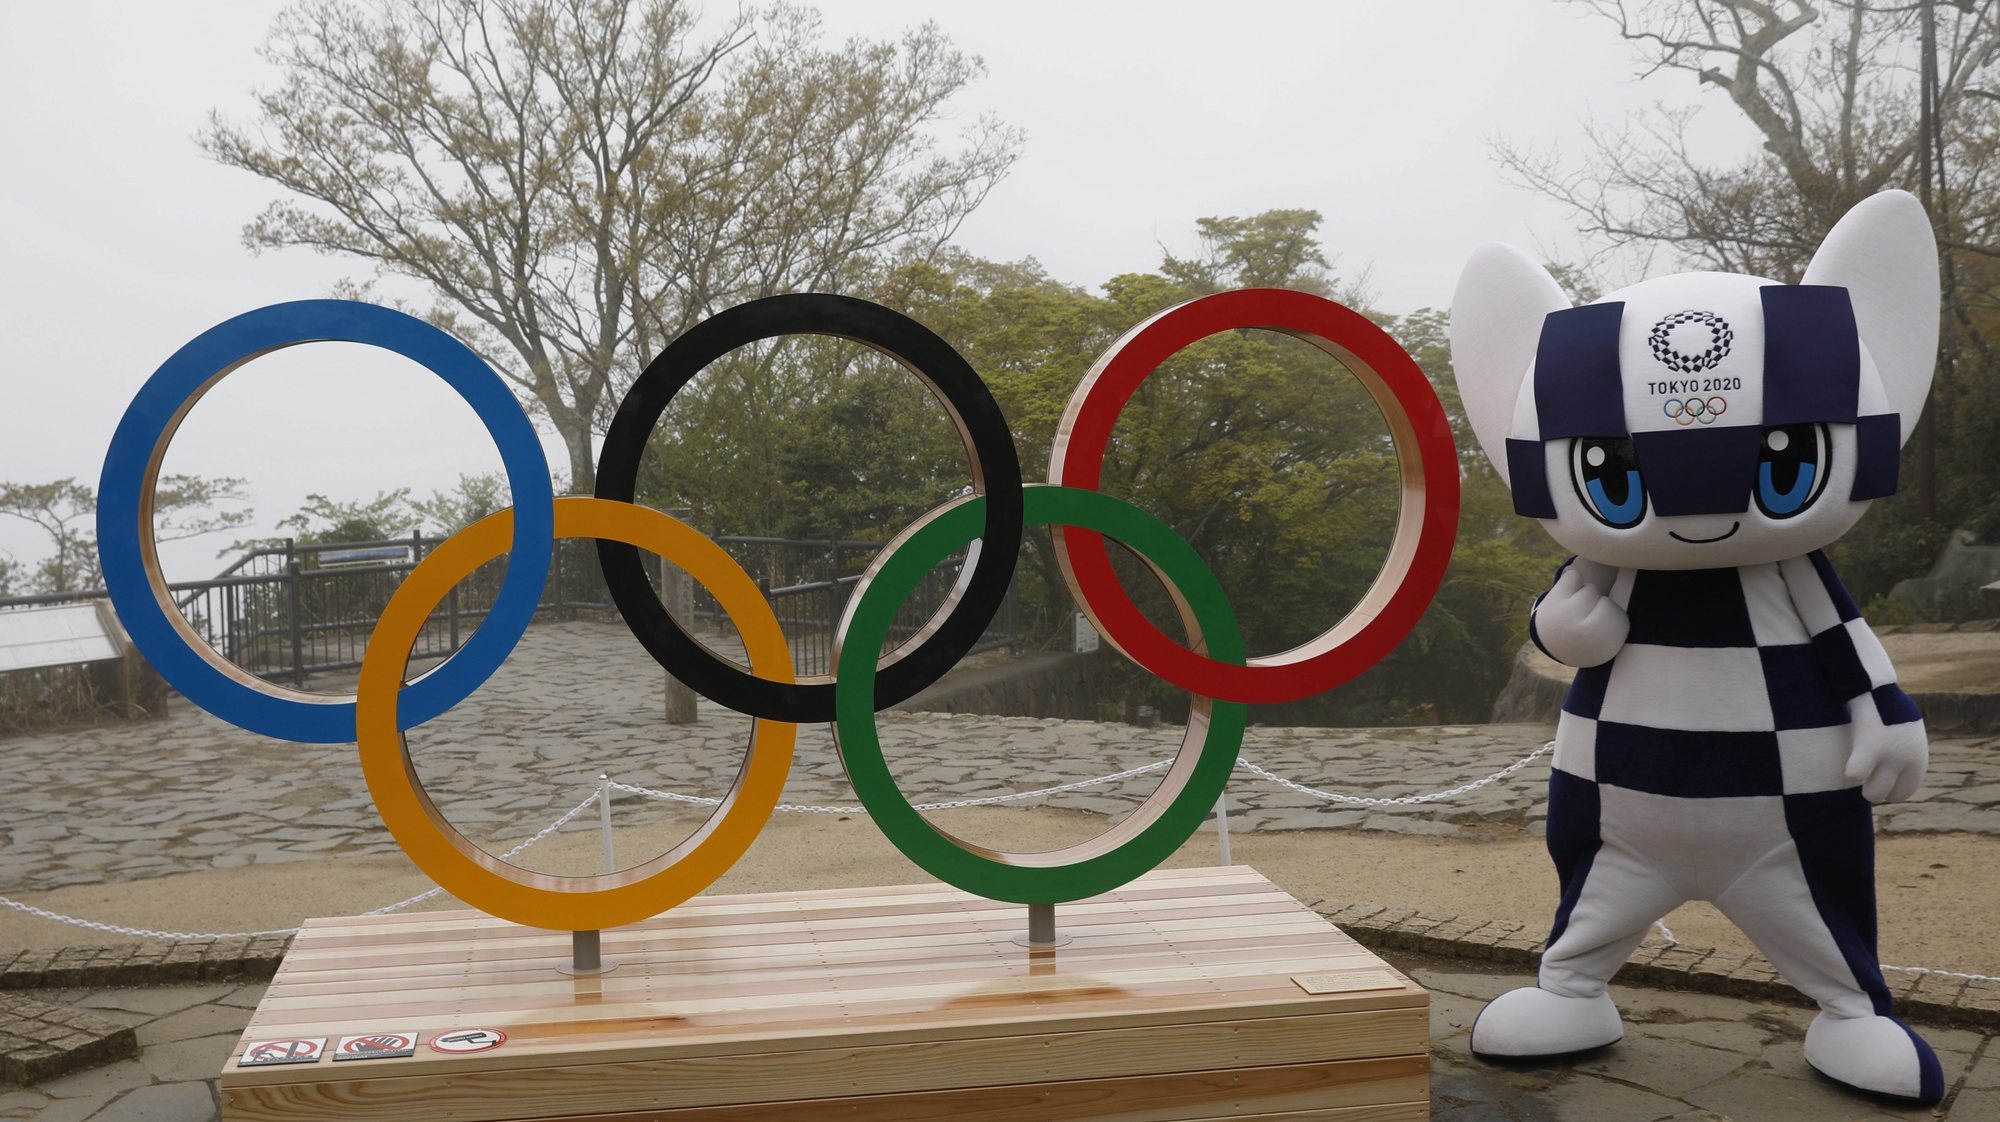 epa09134158 Tokyo 2020 Olympic Games mascot Miraitowa poses with a display of Olympic Symbol after unveiling ceremony of the symbol on Mt. Takao in Hachioji, Japan, 14 April 14, 2021, to mark 100 days before the start of 2020 Tokyo Olympic Games.  EPA/KIM KYUNG-HOON / POOL